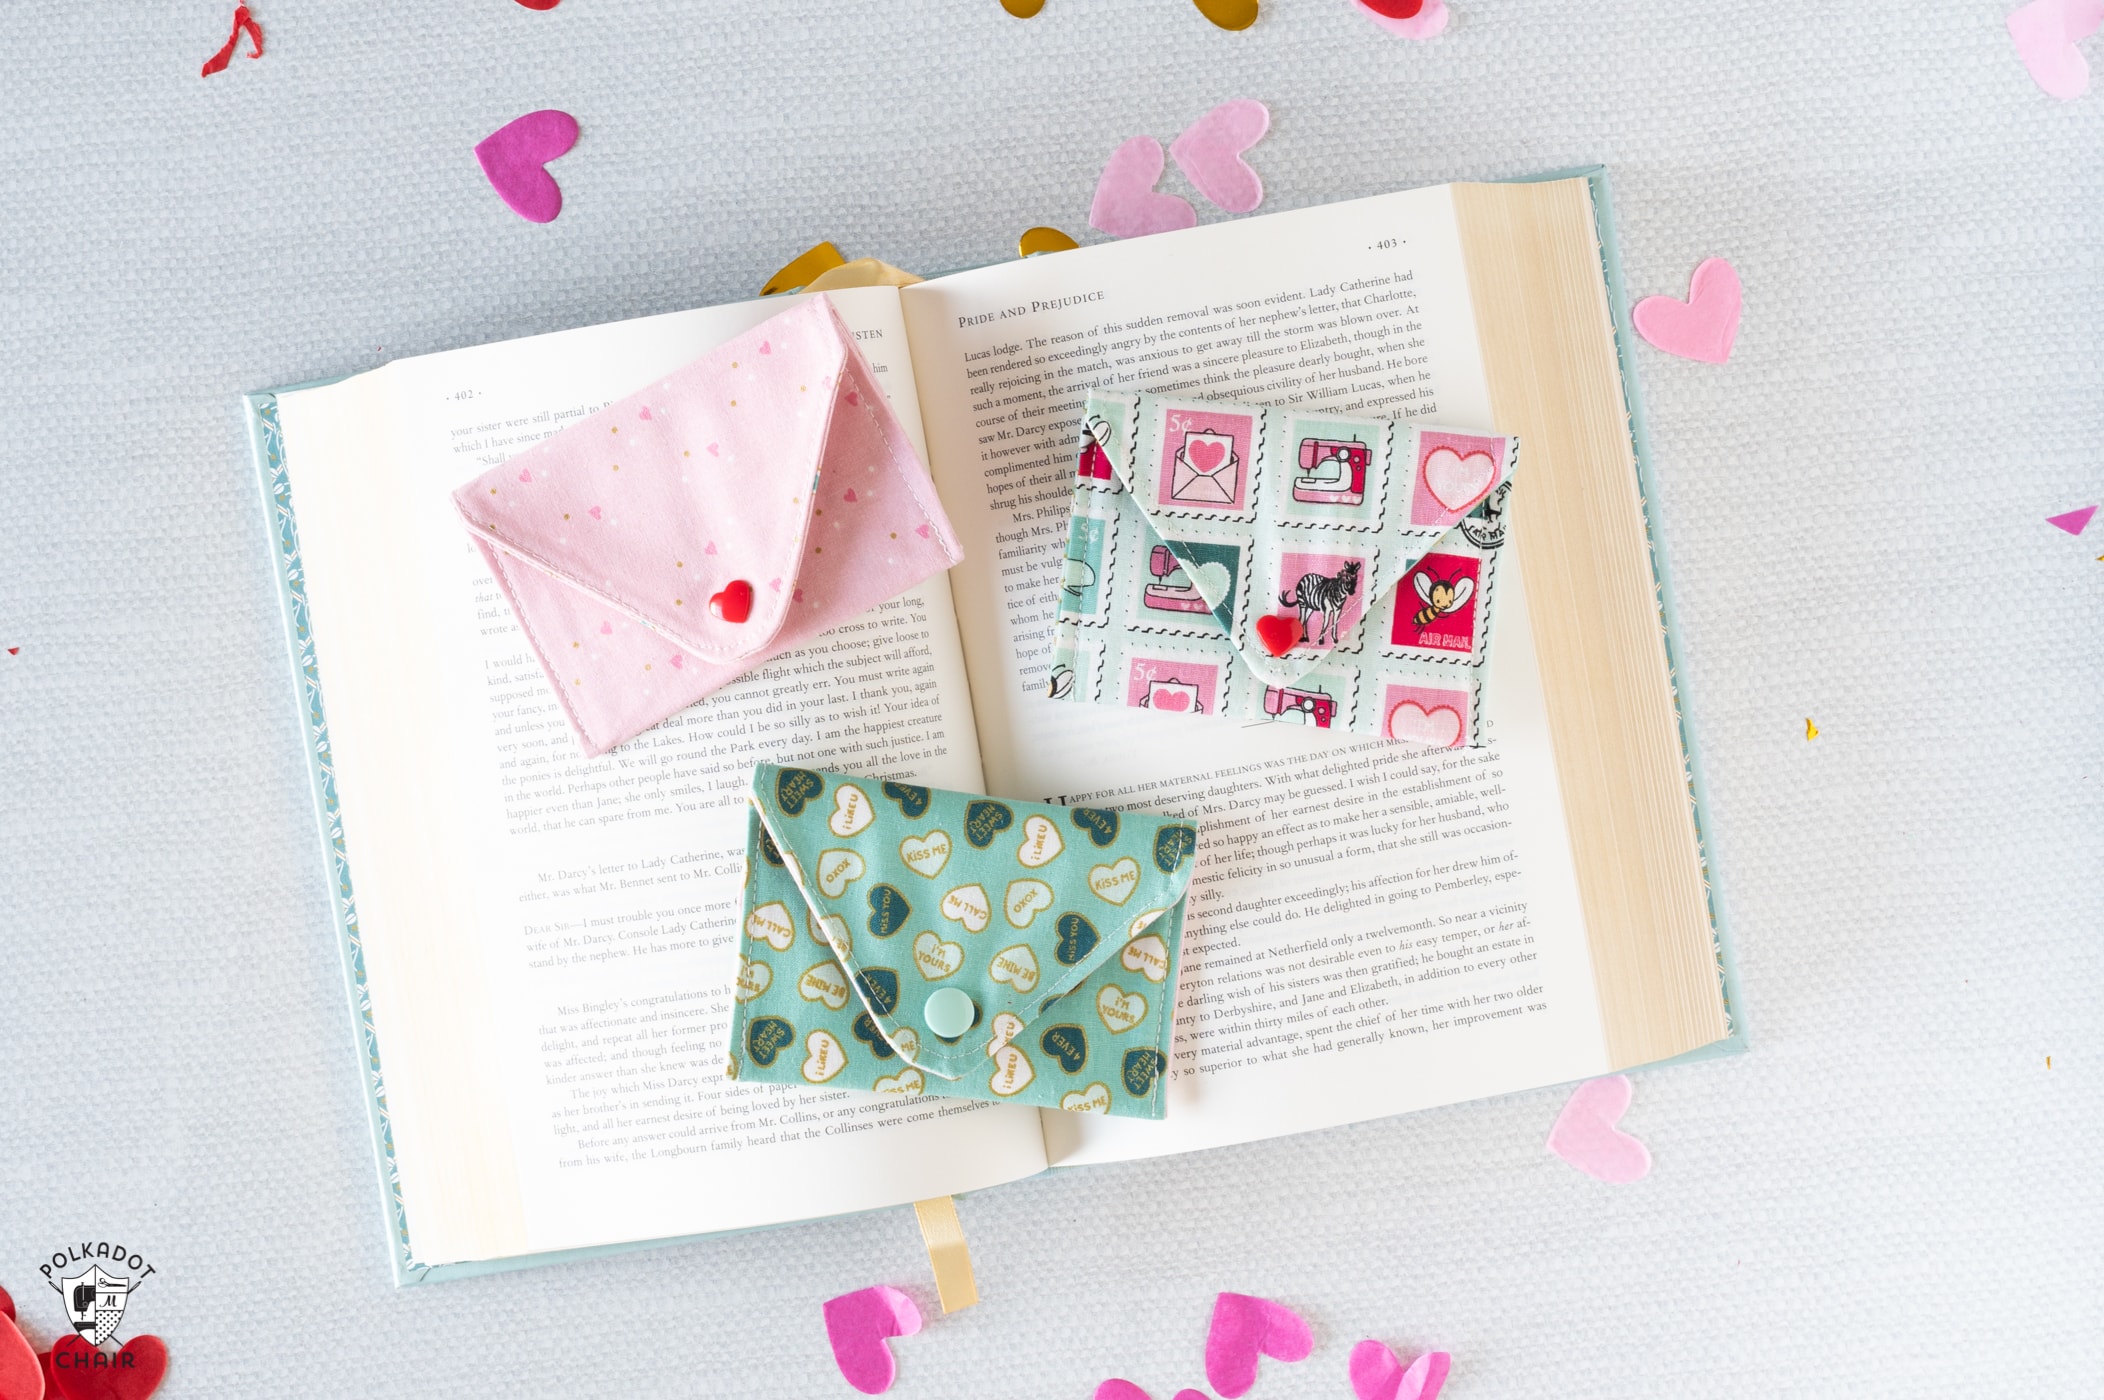 small fabric envelopes on book